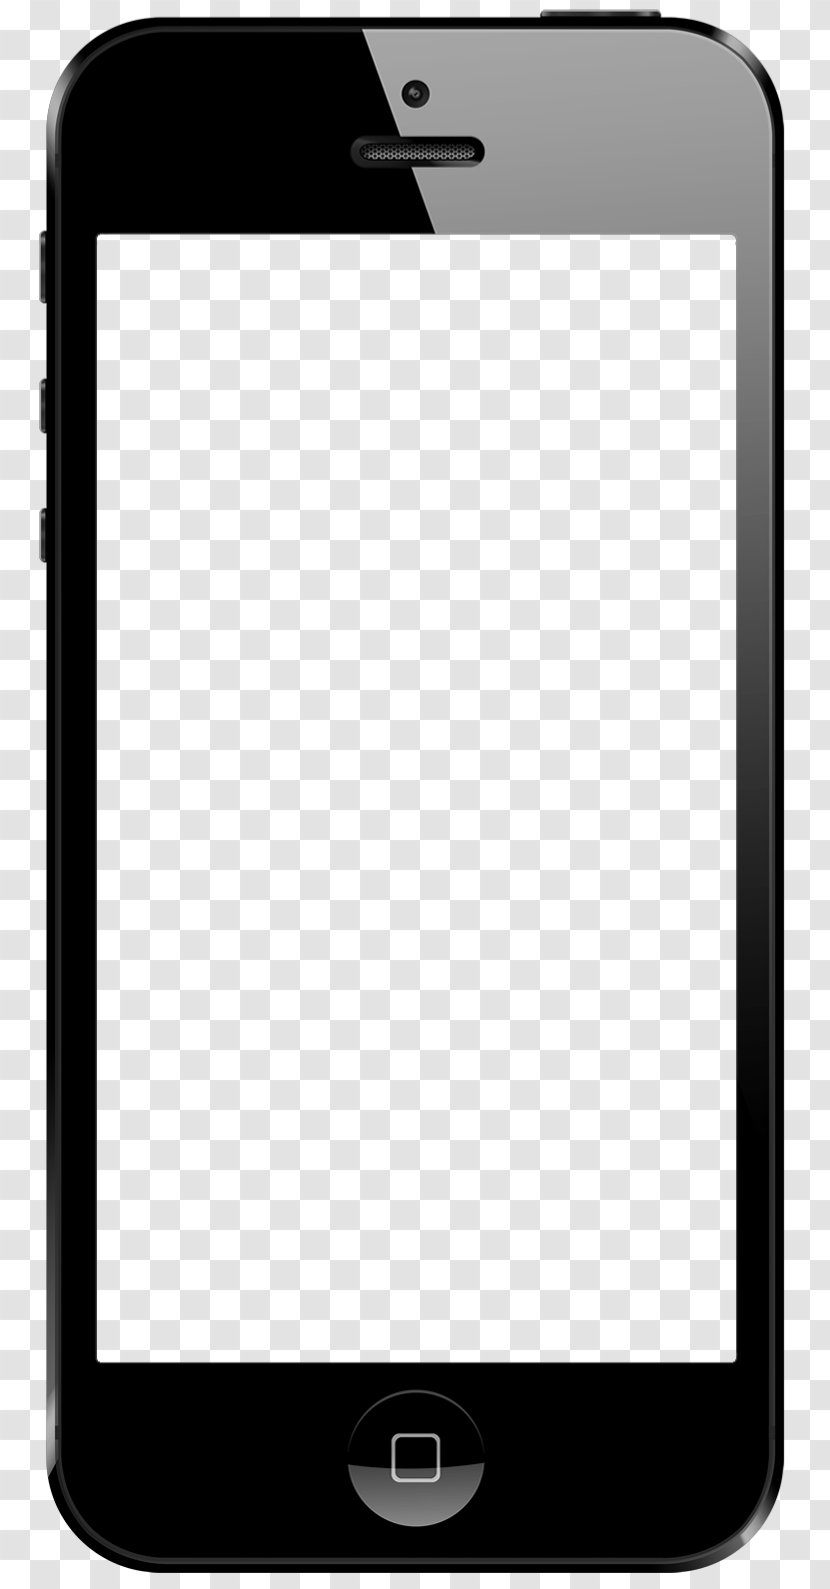 IPhone 5s 4S 6 - Feature Phone - Smartphone Transparent PNG